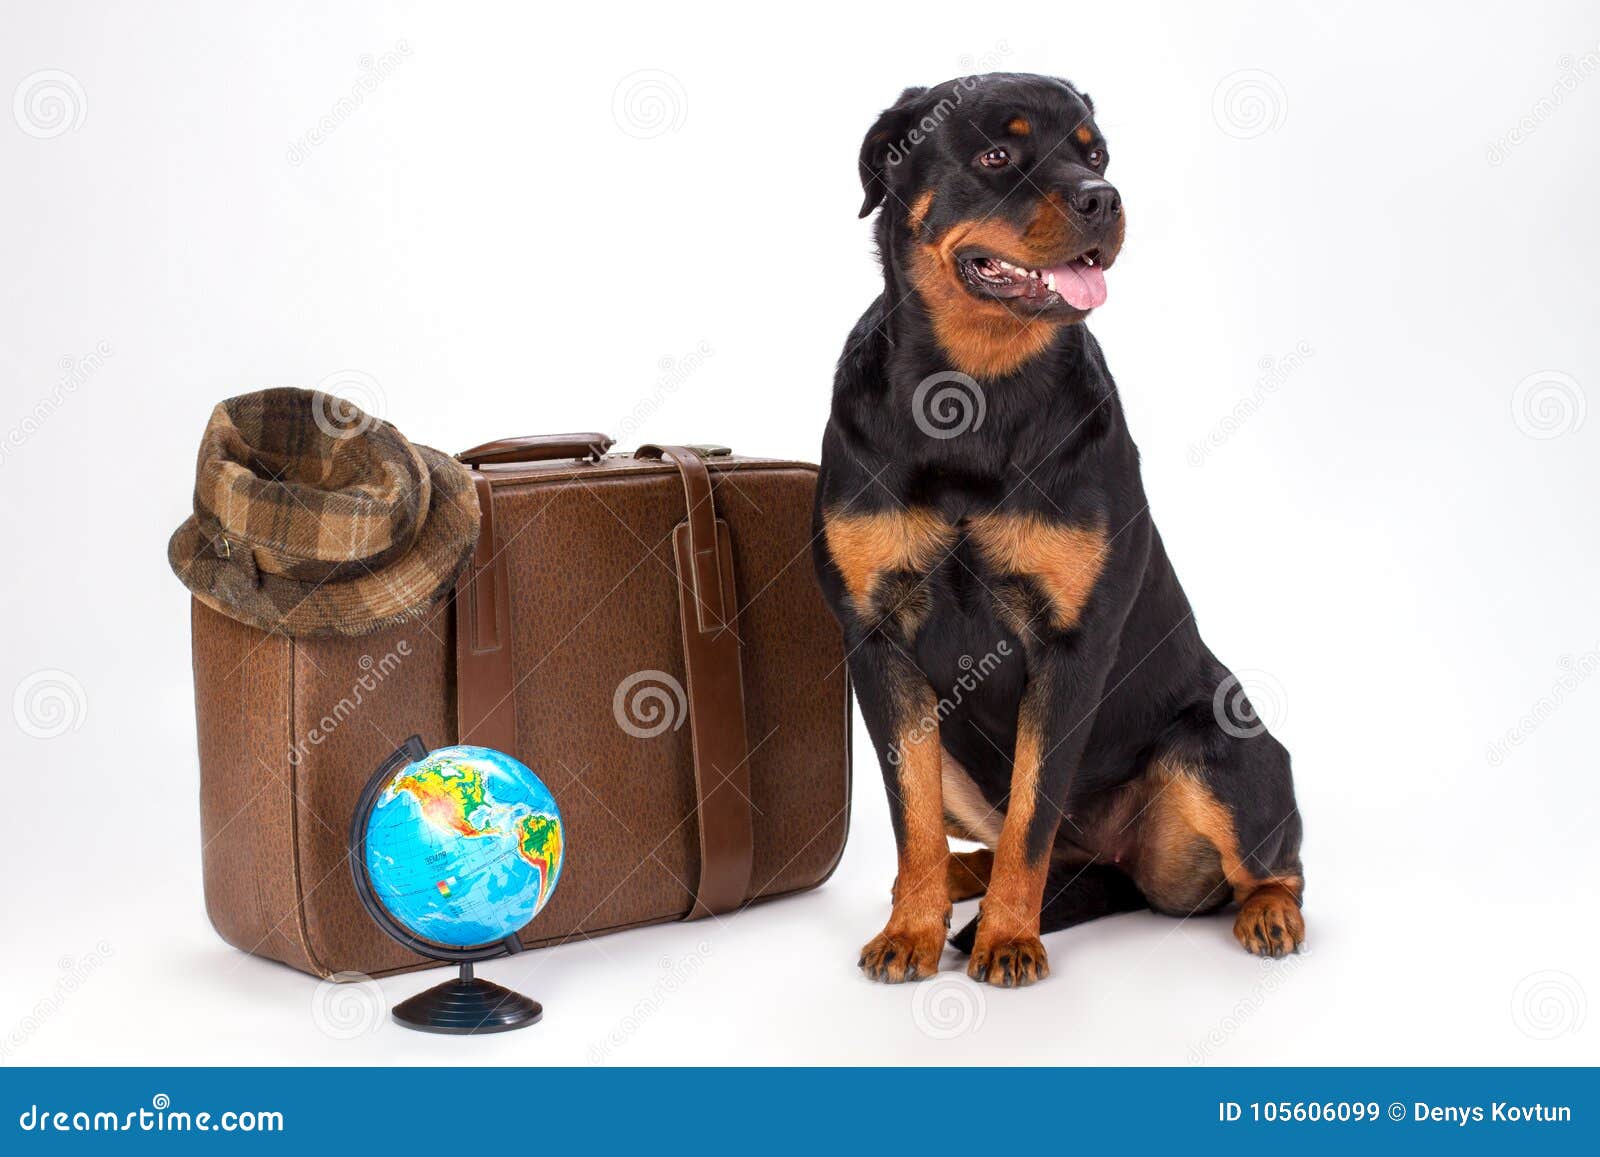 portrait of rottweiler dog and travelling accessories.